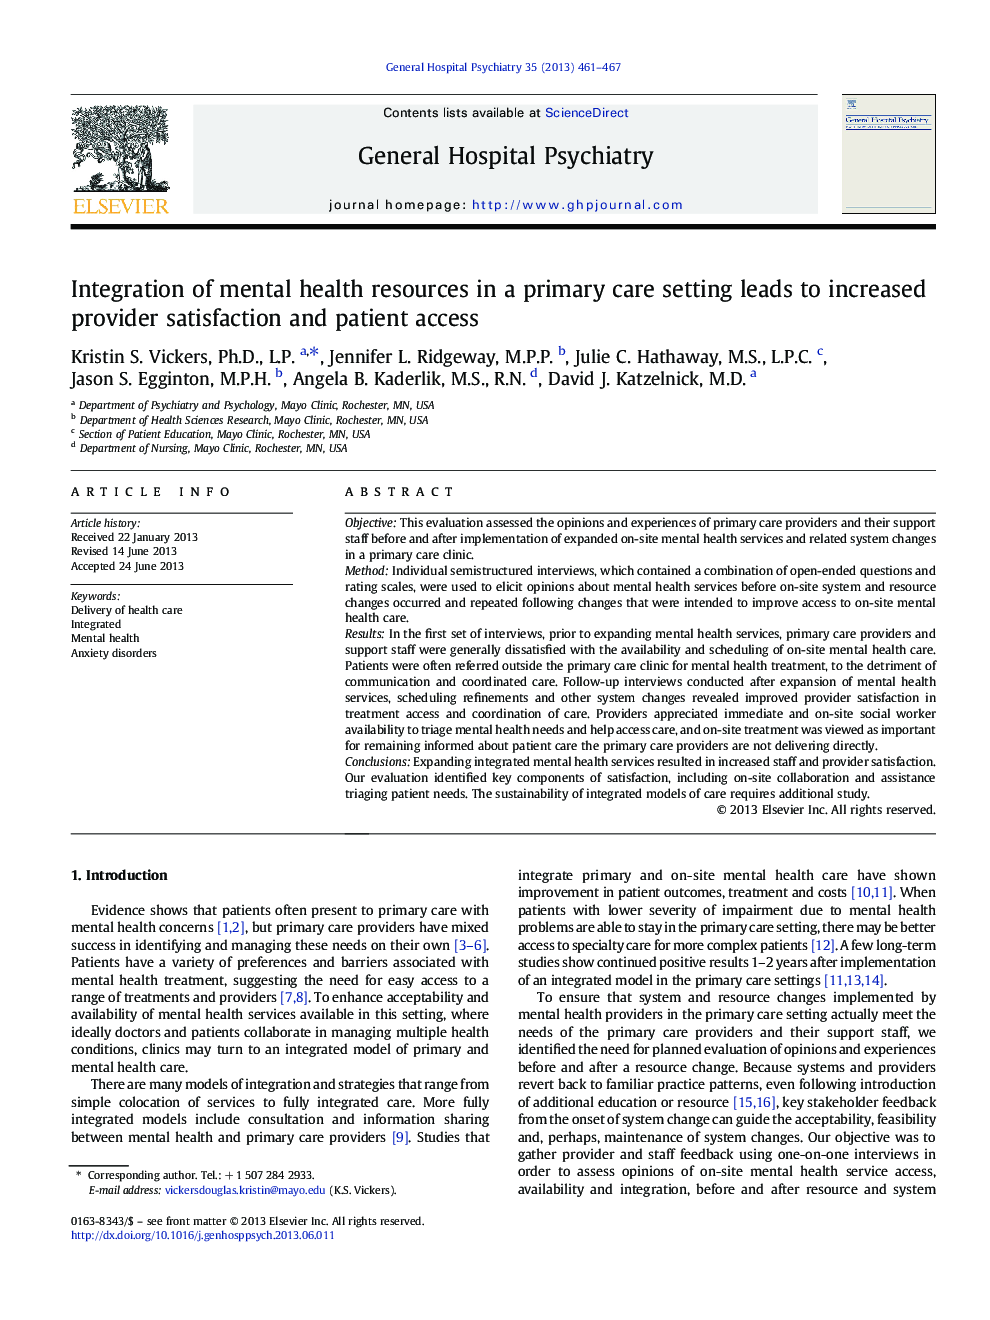 Integration of mental health resources in a primary care setting leads to increased provider satisfaction and patient access